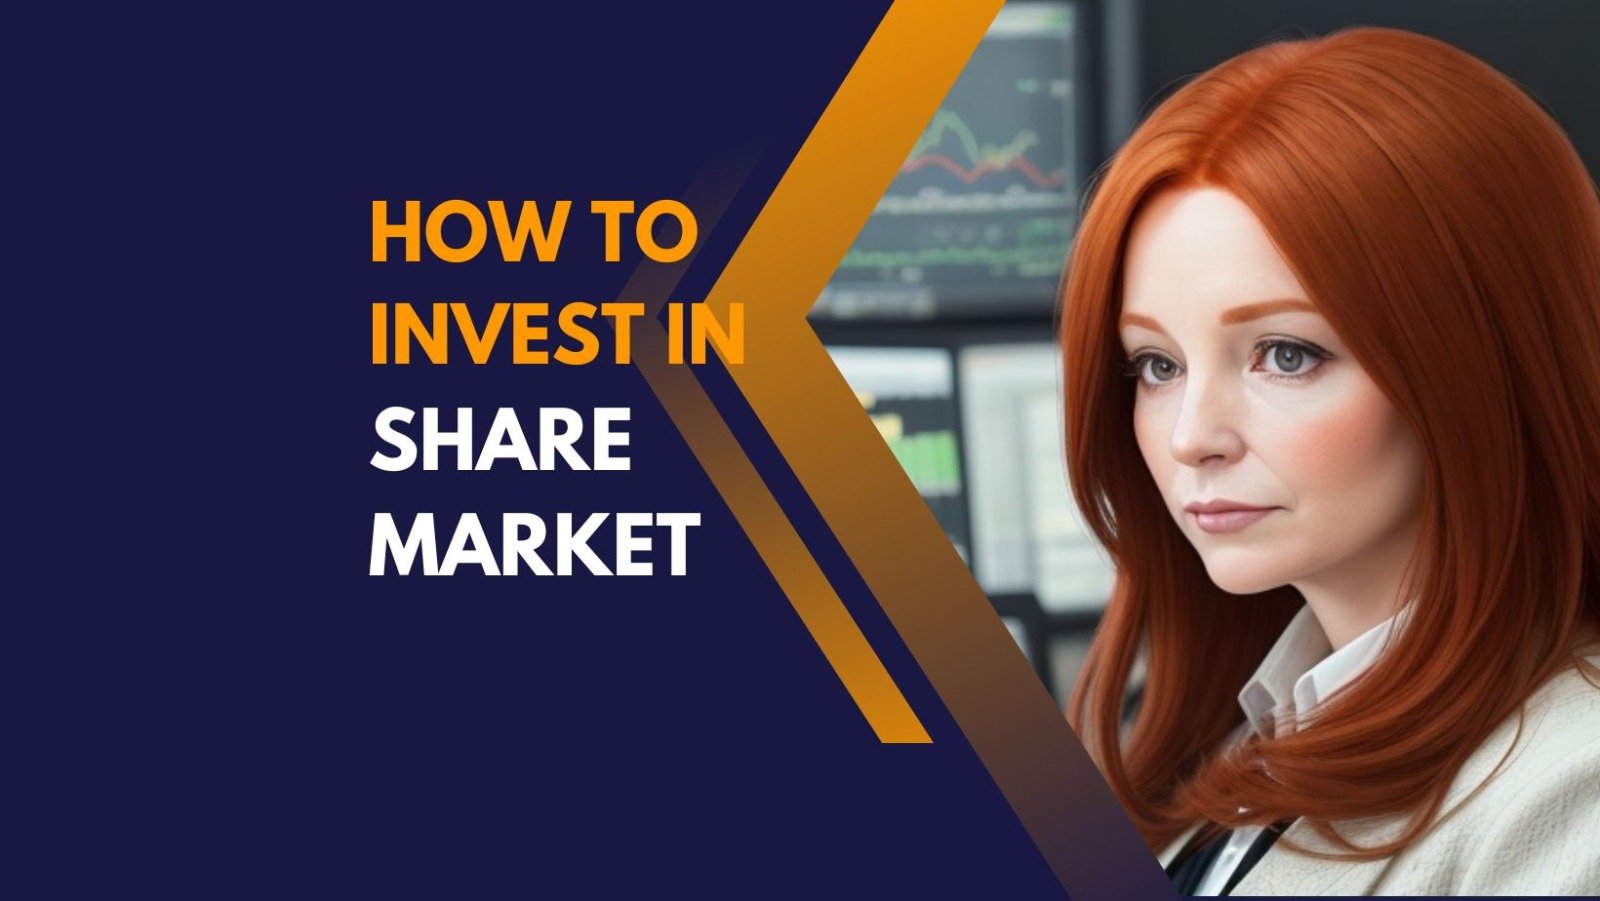 Investment in share market